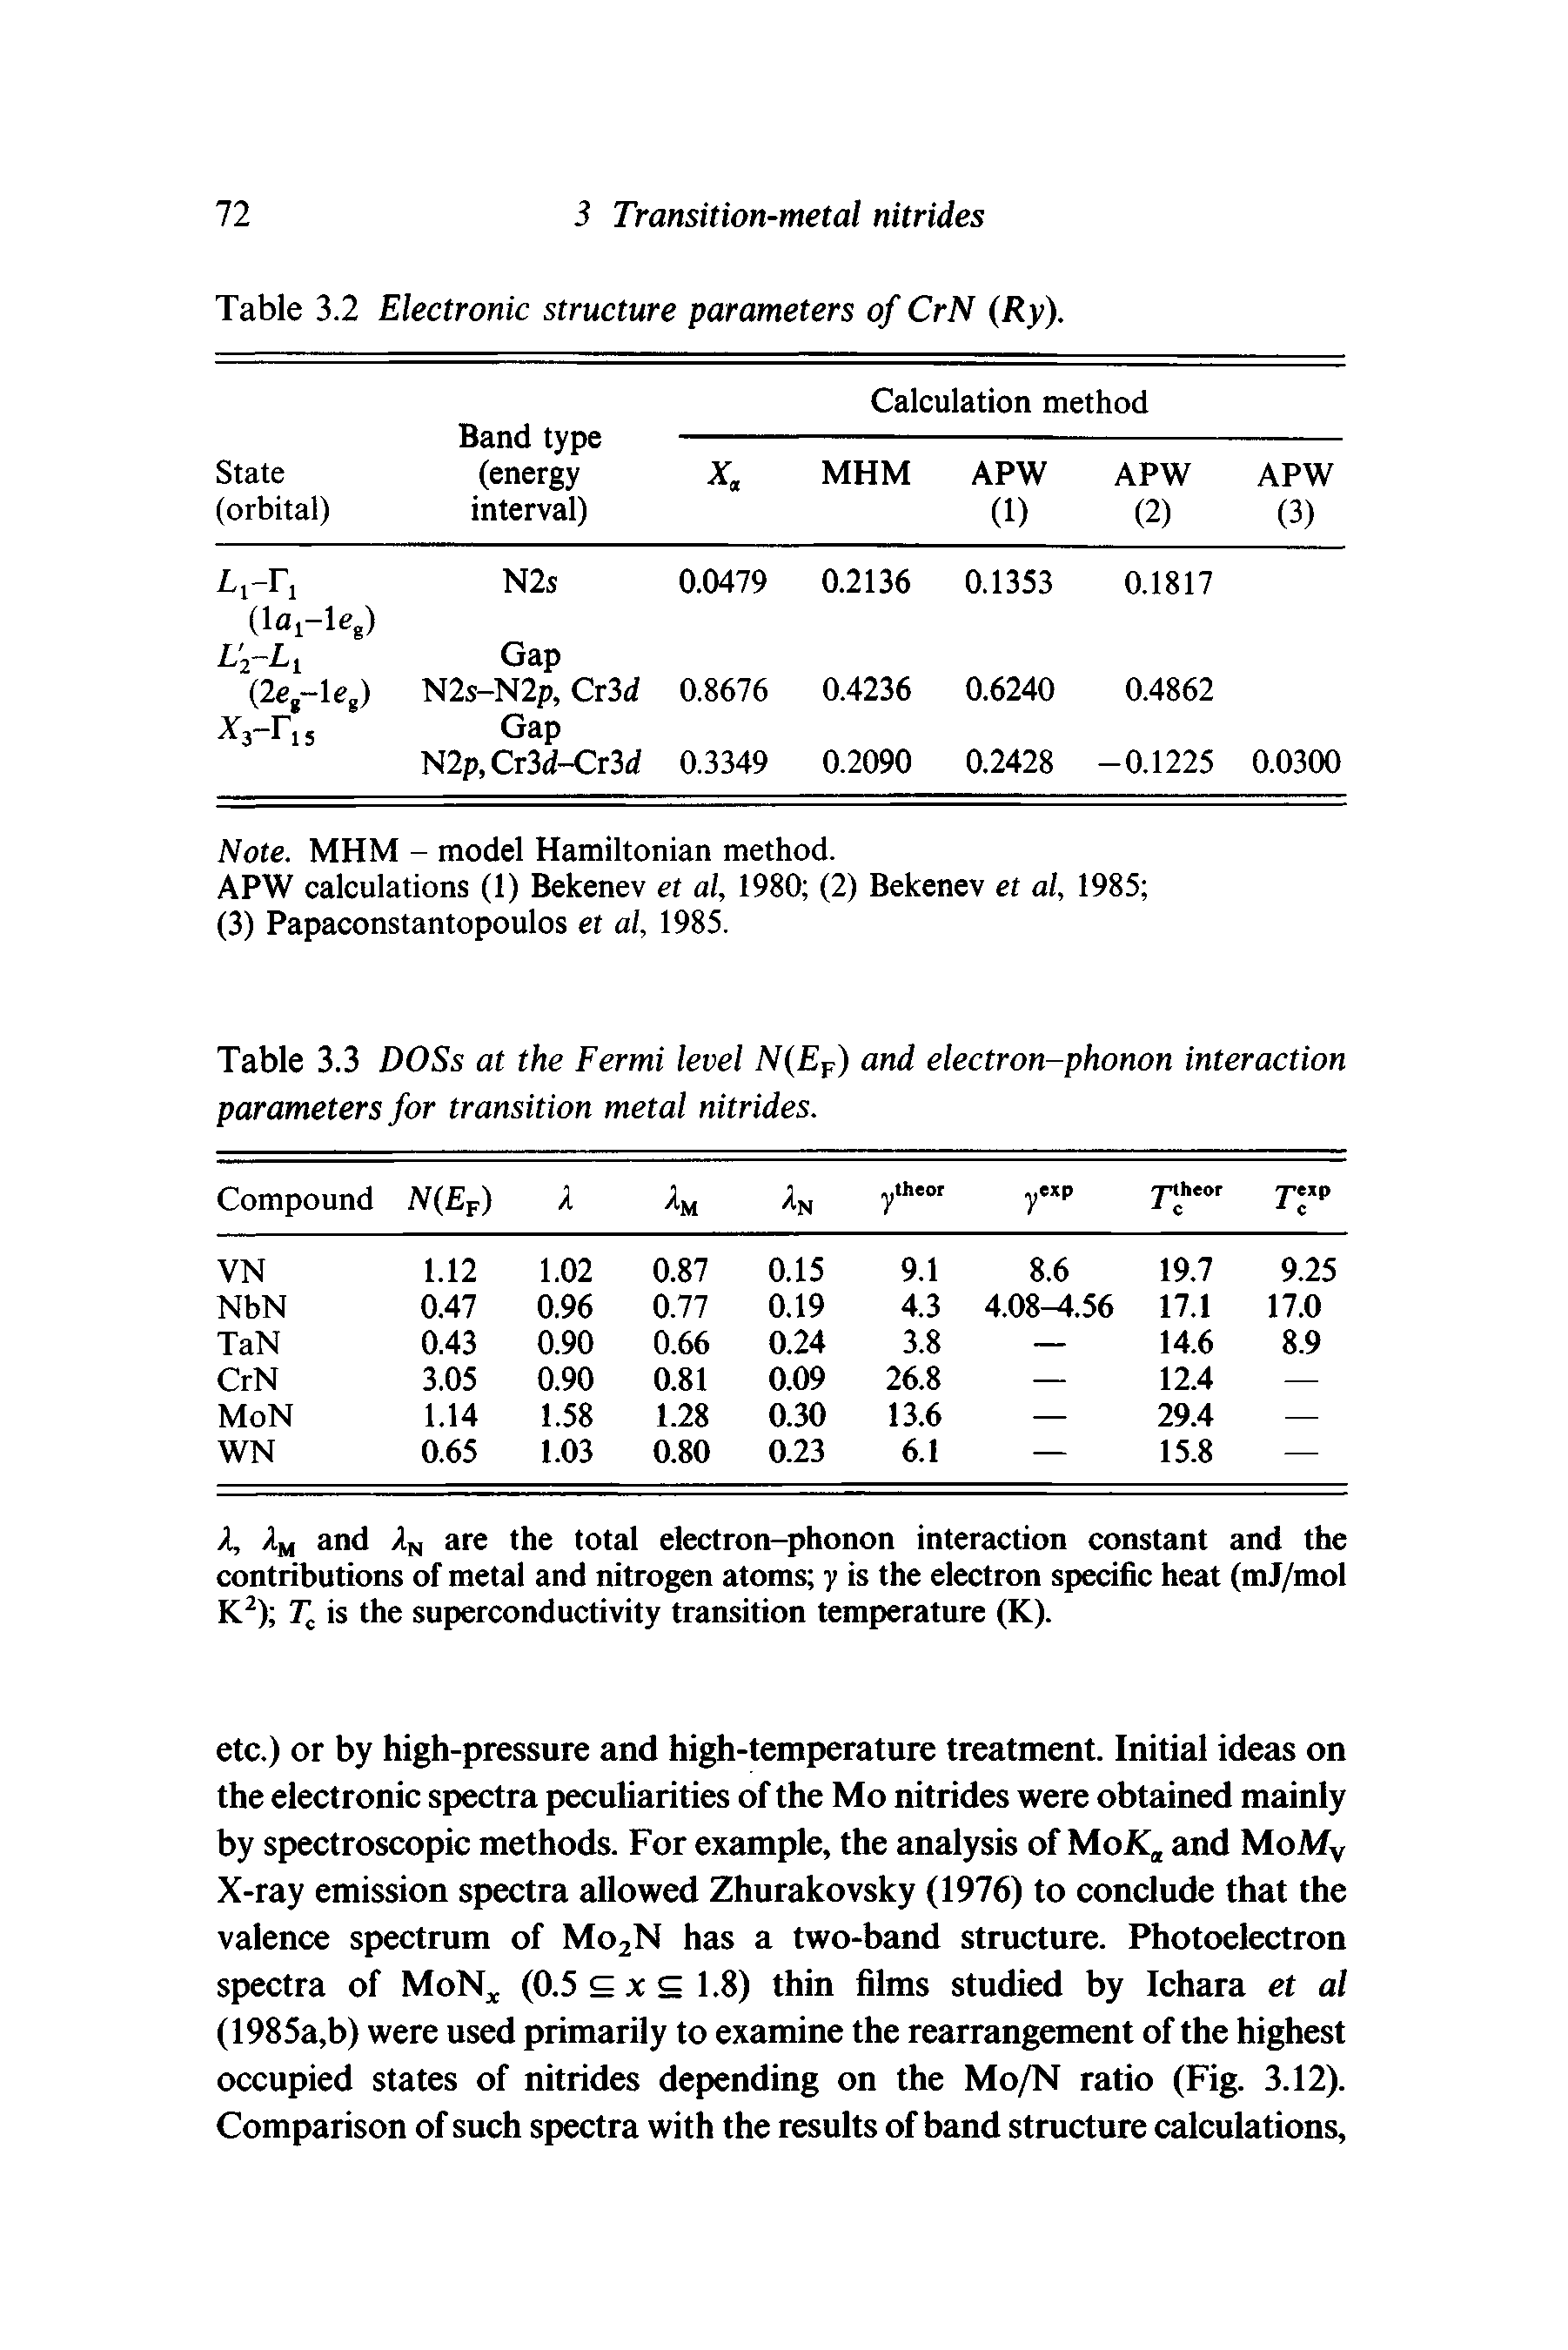 Table 3.3 DOSs at the Fermi level N( p) and electron-phonon interaction parameters for transition metal nitrides.